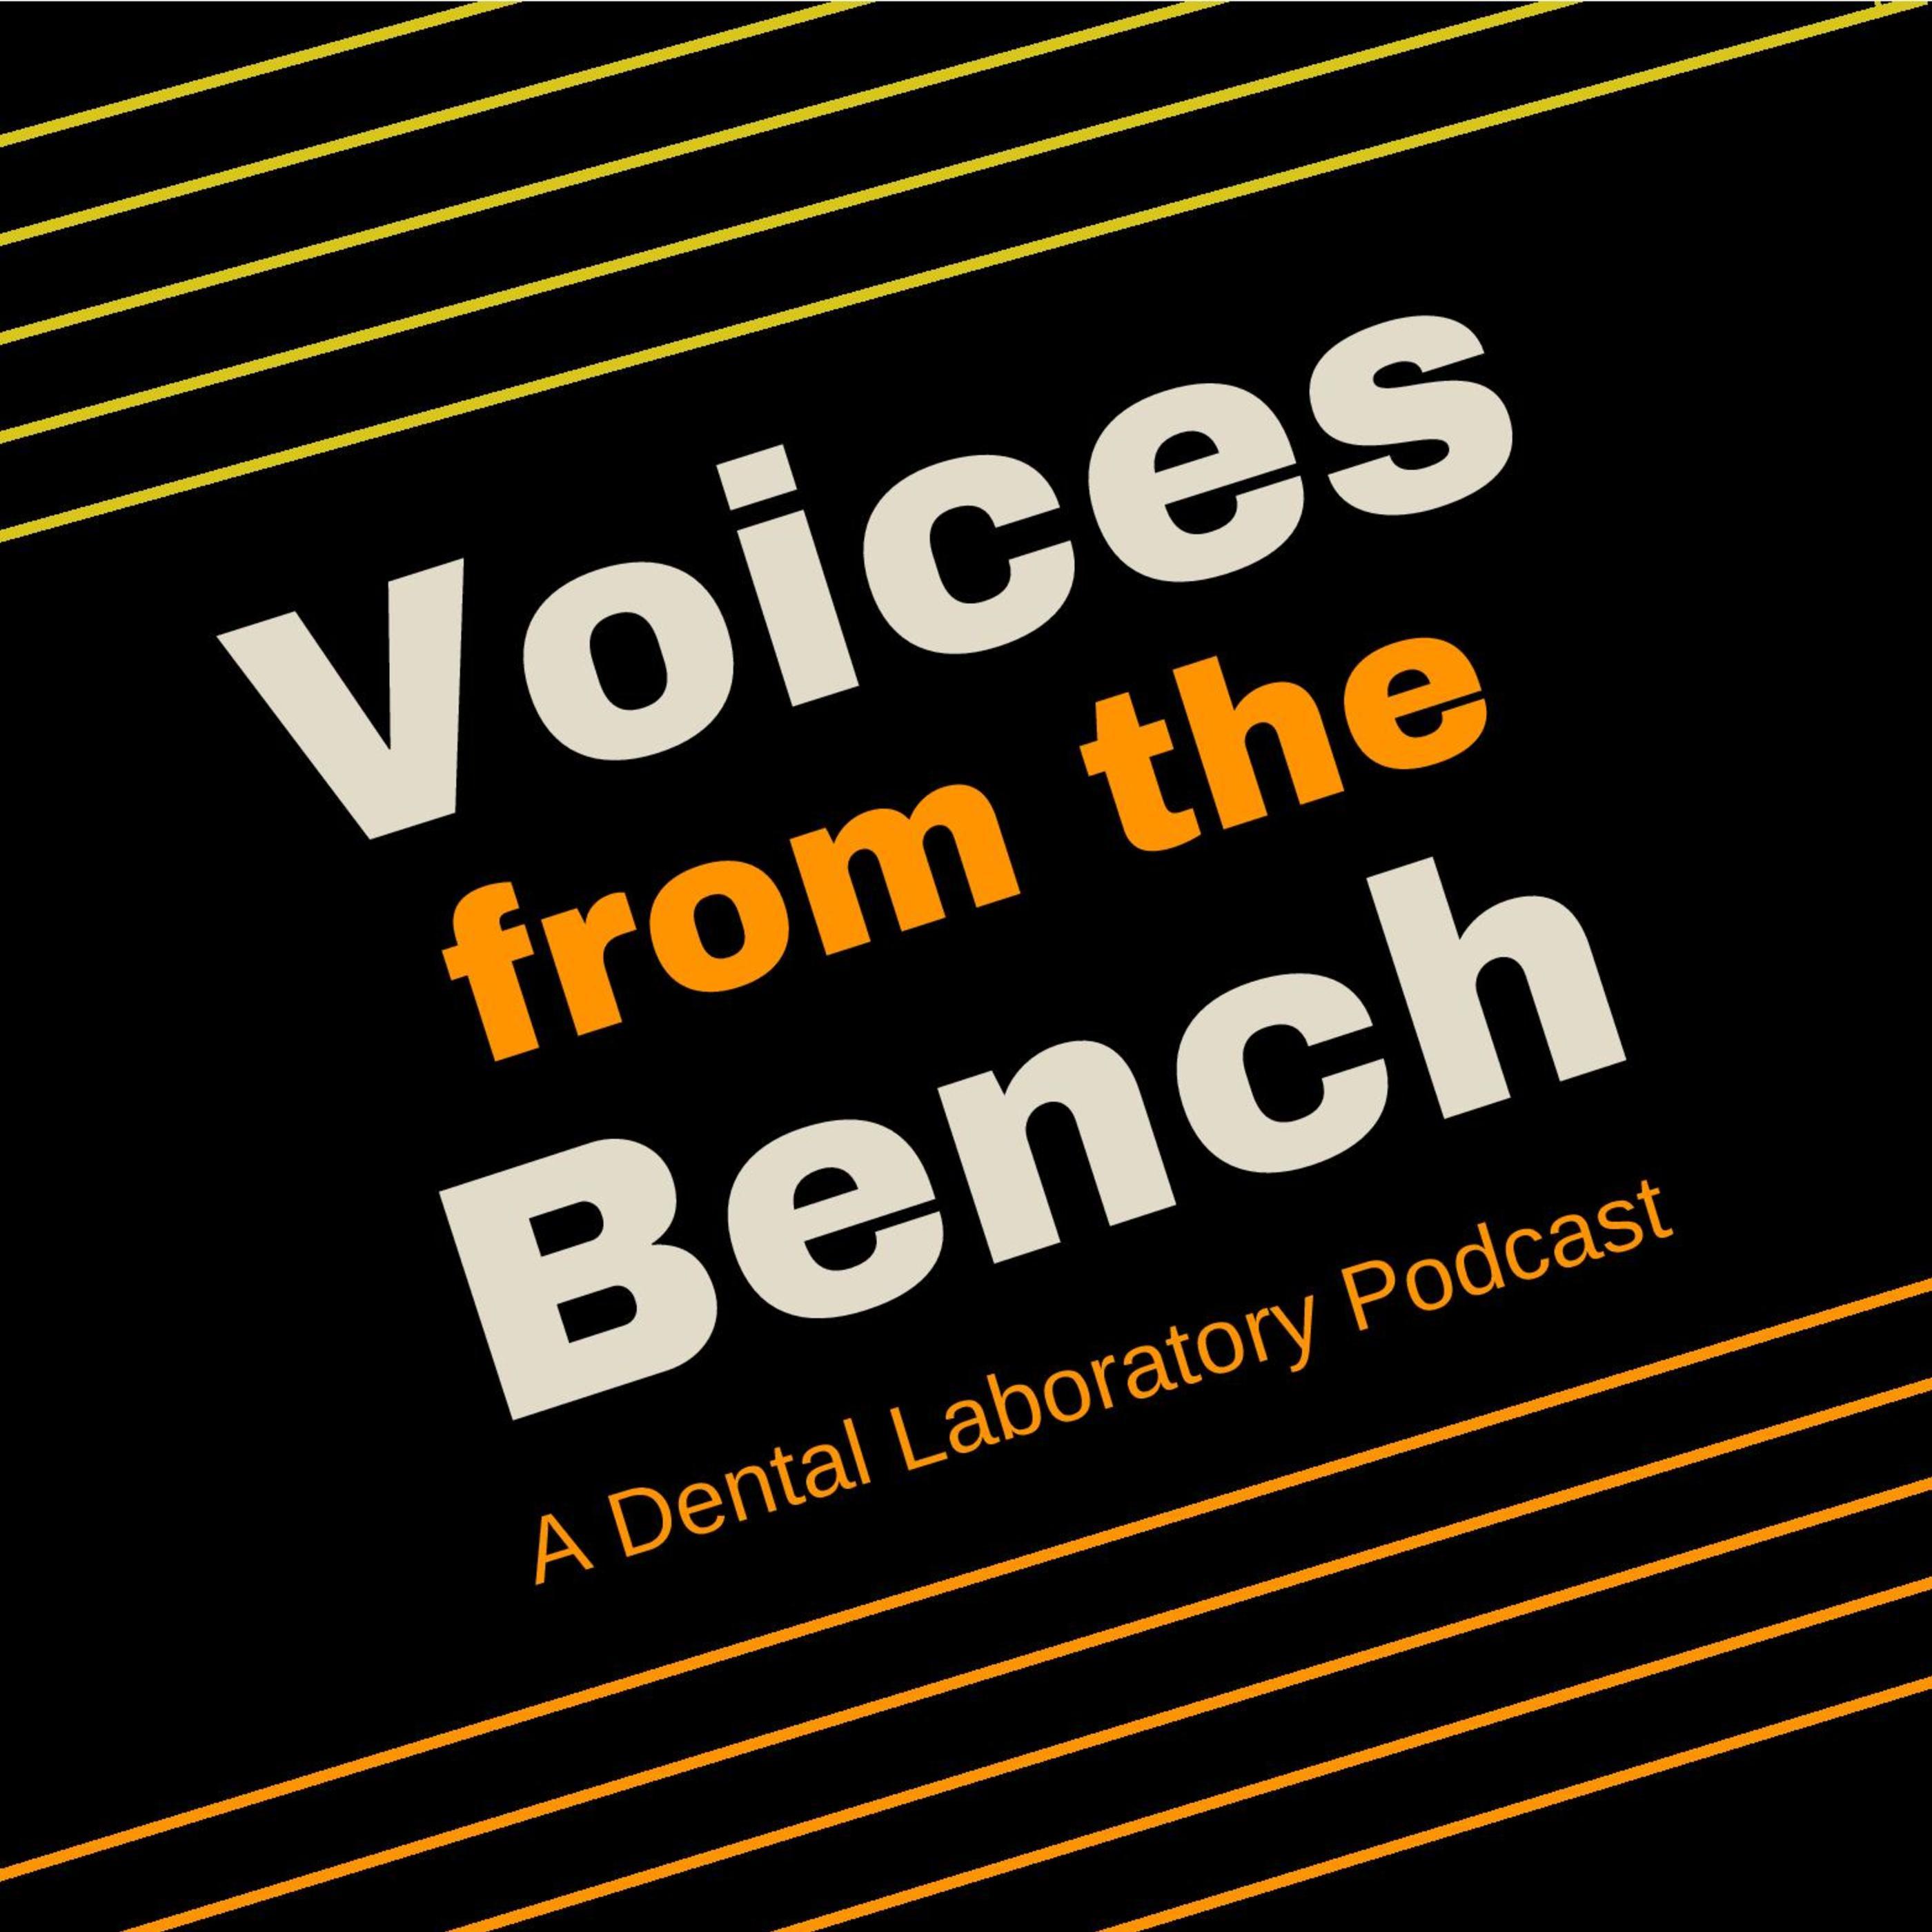 Episode 7: The Greatest Spectacle in the Dental Laboratory Industry -  Judy Fishman Talks Lab Day! Part 2 (VFTB7)